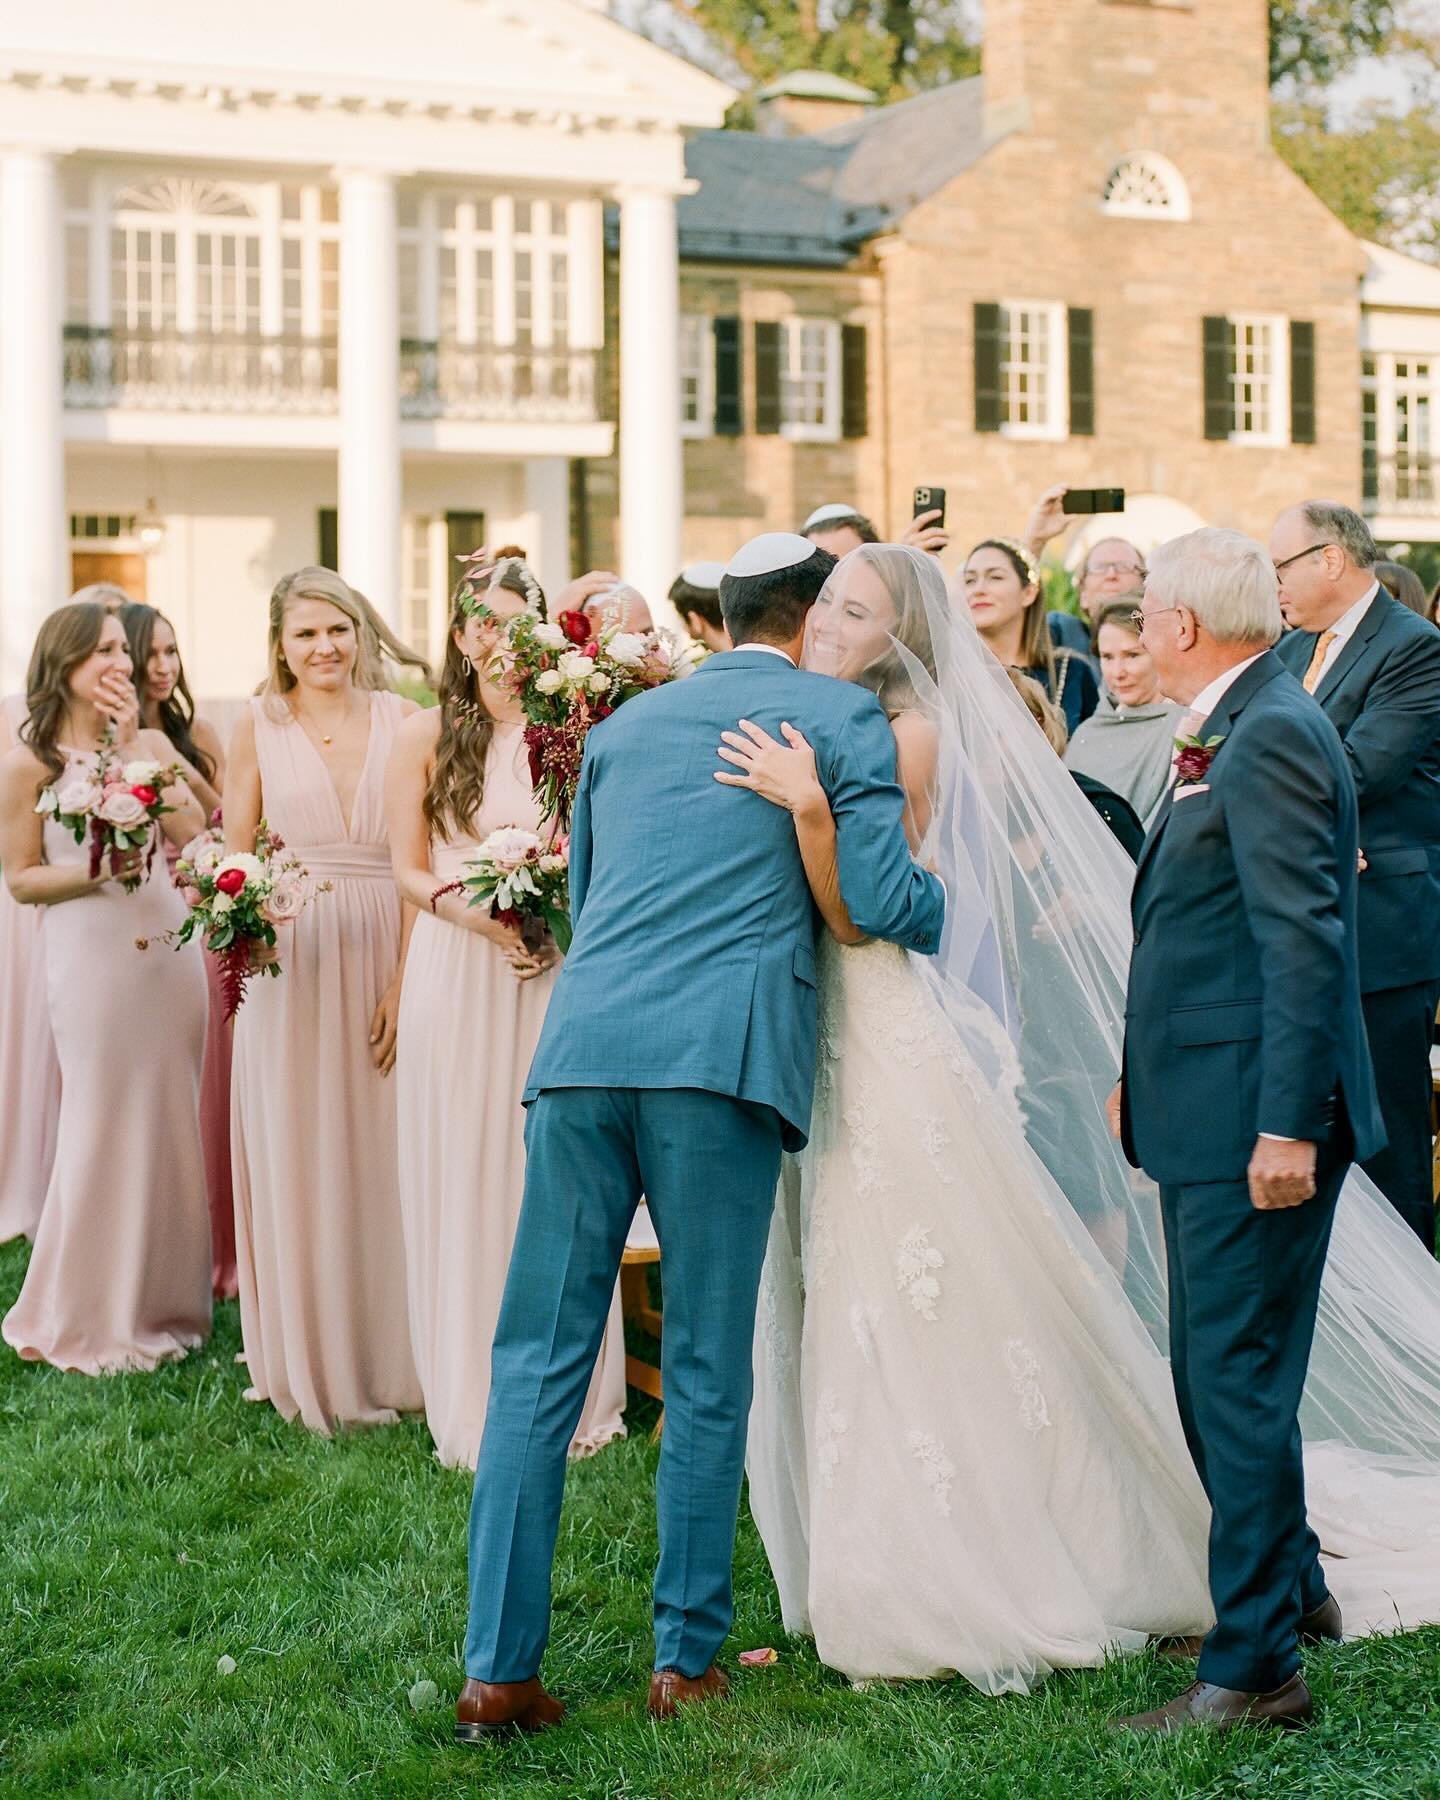 The sweetest top of the aisle moment - D and M were so excited that they couldn&rsquo;t resist a hug when she reached him at the altar! 

Planner @sarahkazemburgevents 
Venue @glenviewmansion 
Floral Design @steelcutflowerco 
Beauty @georgetownbride 